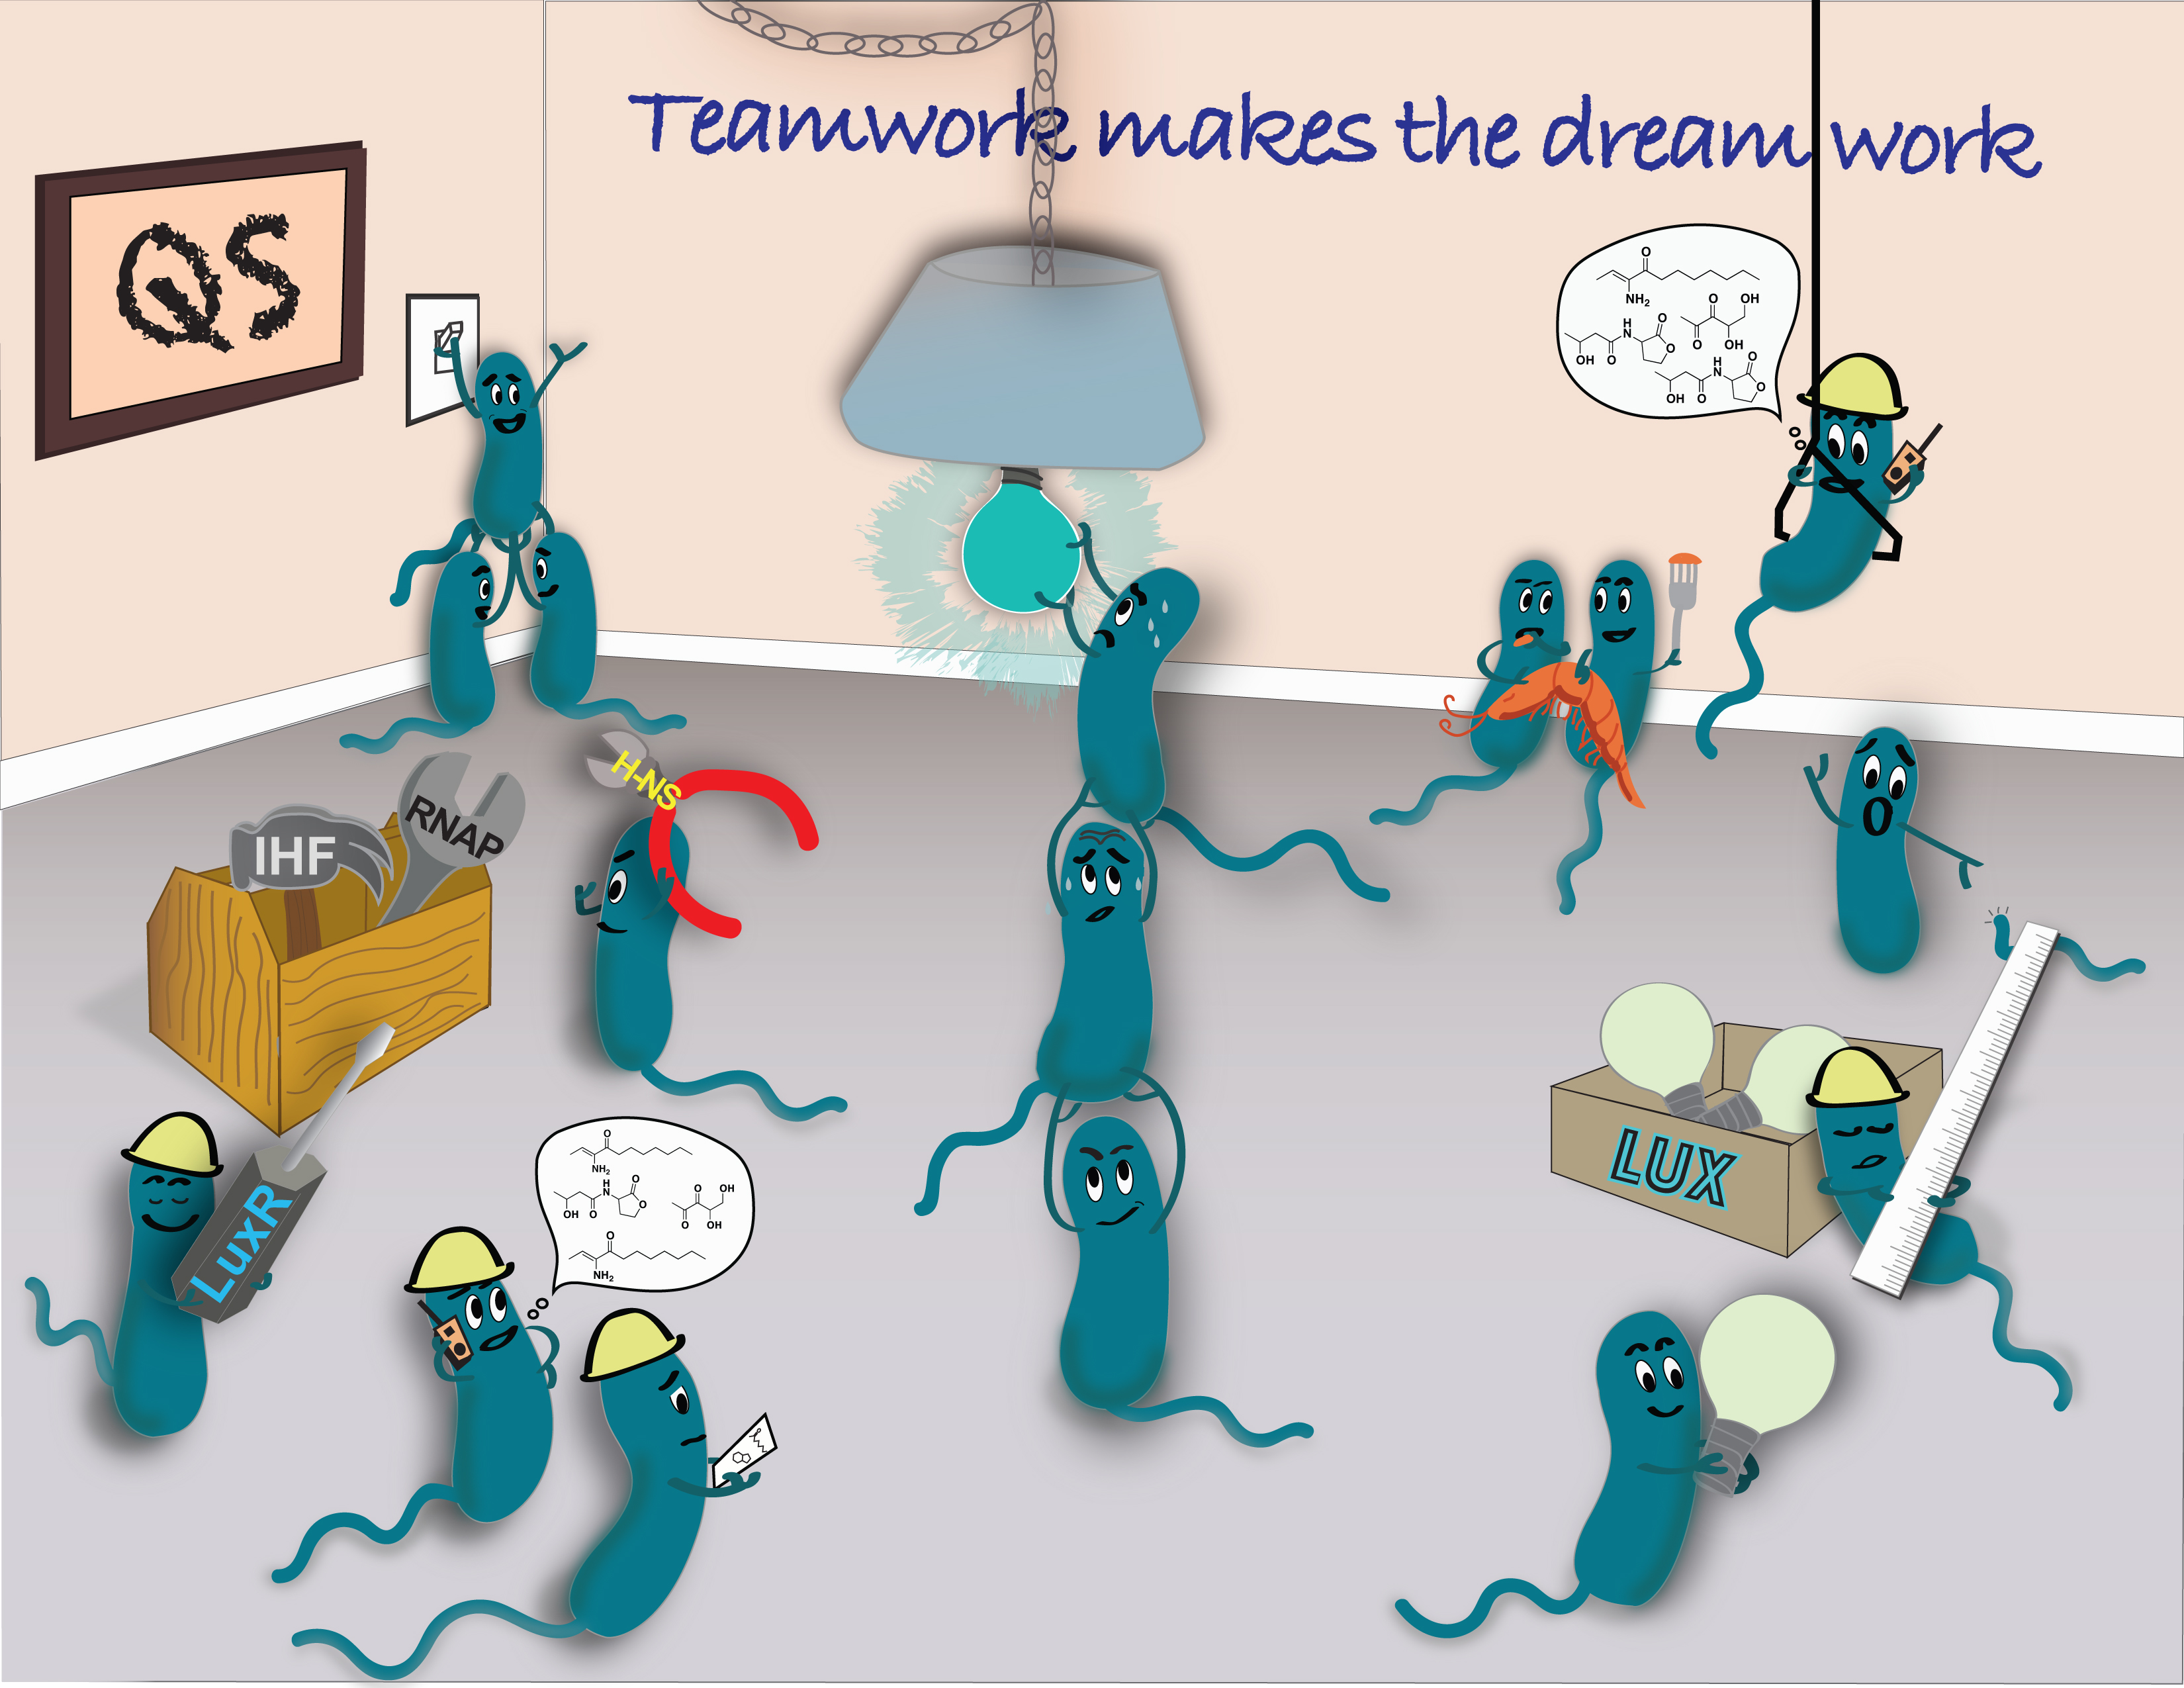 image showing blue cartoon bacteria working together to turn on light switches, screw in light bulbs, and do other housework using tools labeled as IHF, H-NS, RNAP, and LuxR. The text overlaying the image states teamwork makes the dreamwork